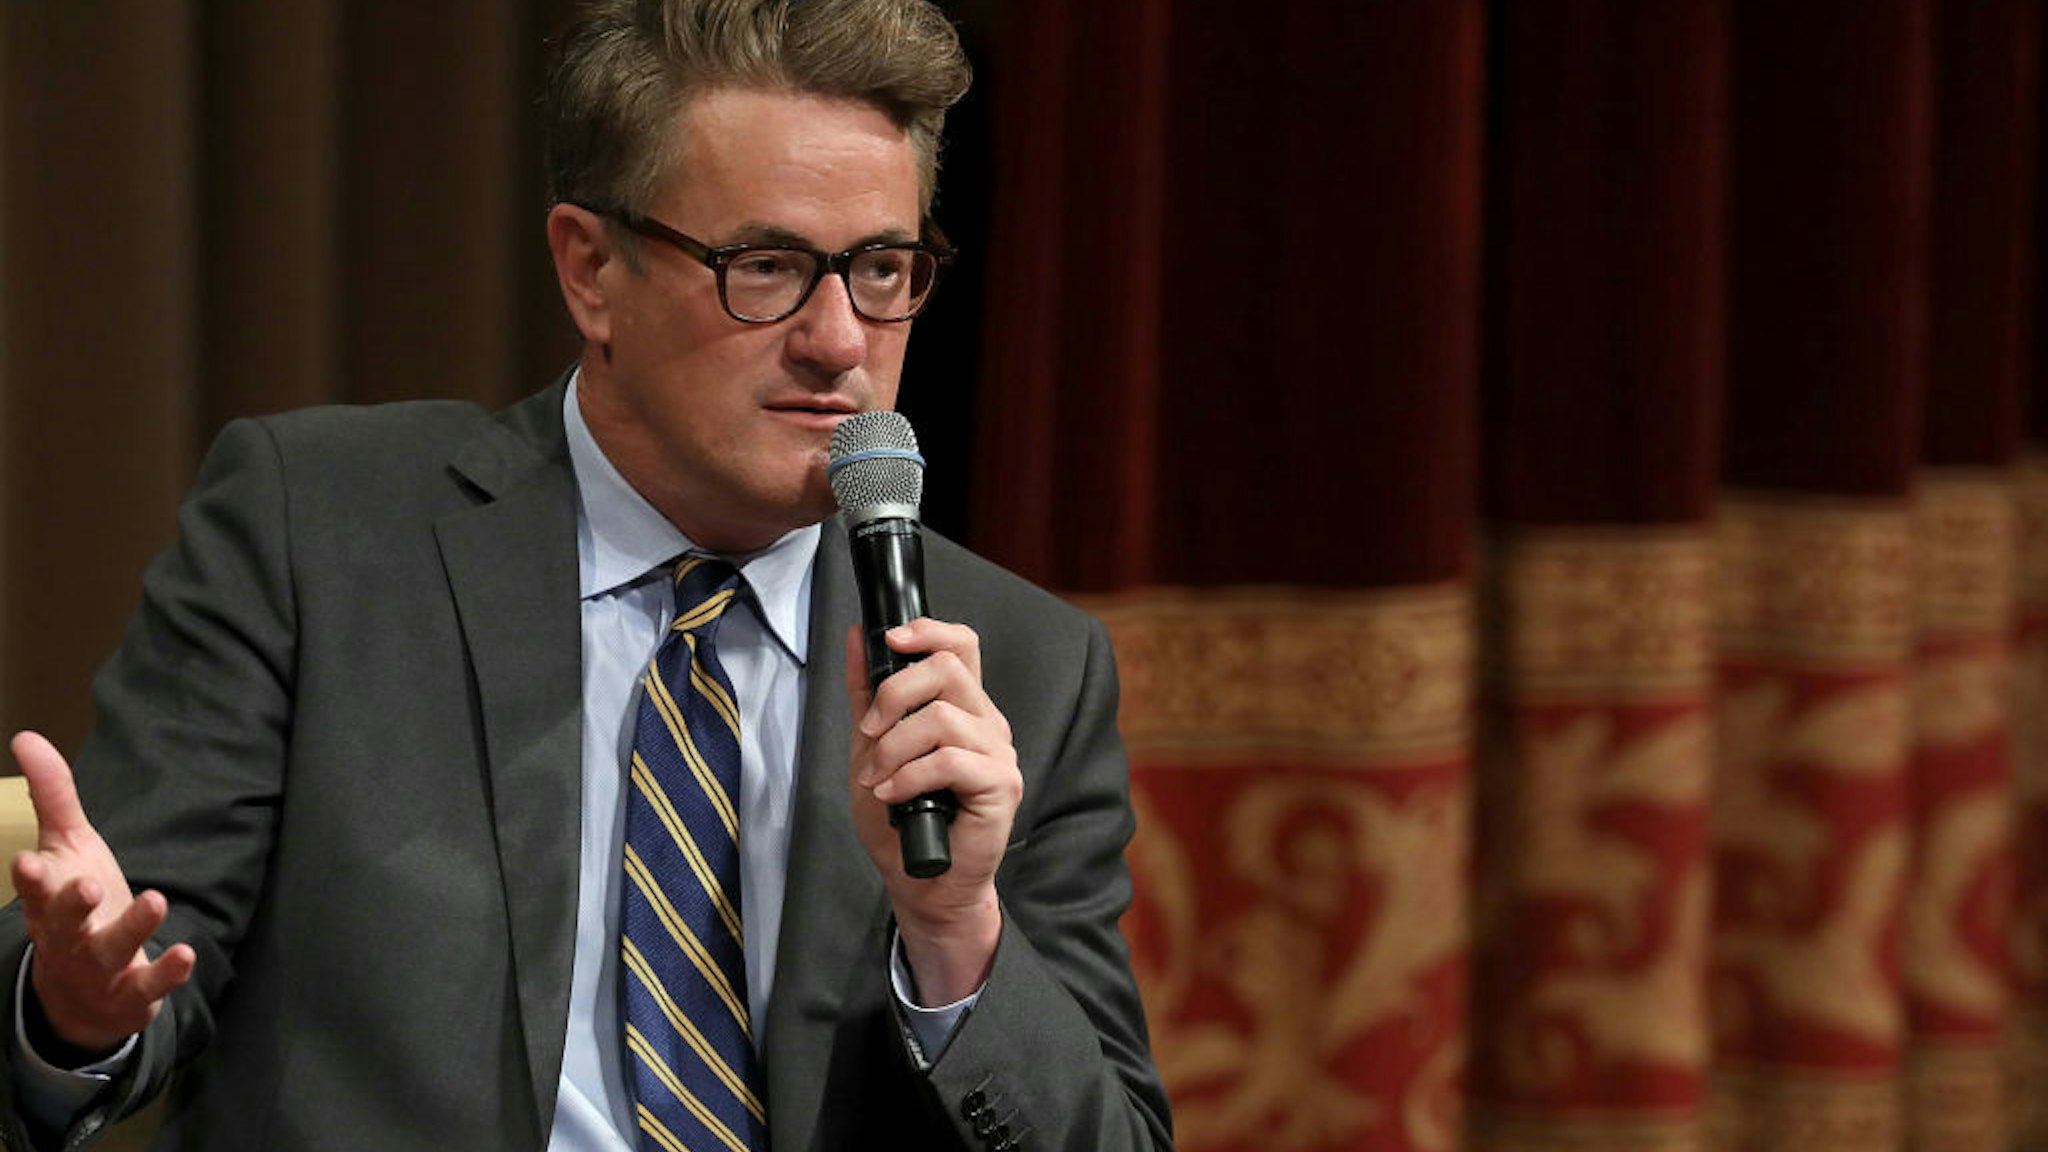 WASHINGTON, DC - JULY 12: MSNBC 'Morning Joe' host Joe Scarborough speaks during an interview with his co-host Mika Brzezinski and philanthropist and financier David Rubenstein during a Harvard Kennedy School Institute of Politics event in the McGowan Theater at the National Archives July 12, 2017 in Washington, DC. Scarborough and Brzezinski, who are engaged to be married, were recently attacked by President Donald Trump on Twitter, where he called the hosts 'Psycho Joe' and 'low I.Q. Crazy Mika,' among other personal insults. (Photo by Chip Somodevilla/Getty Images)